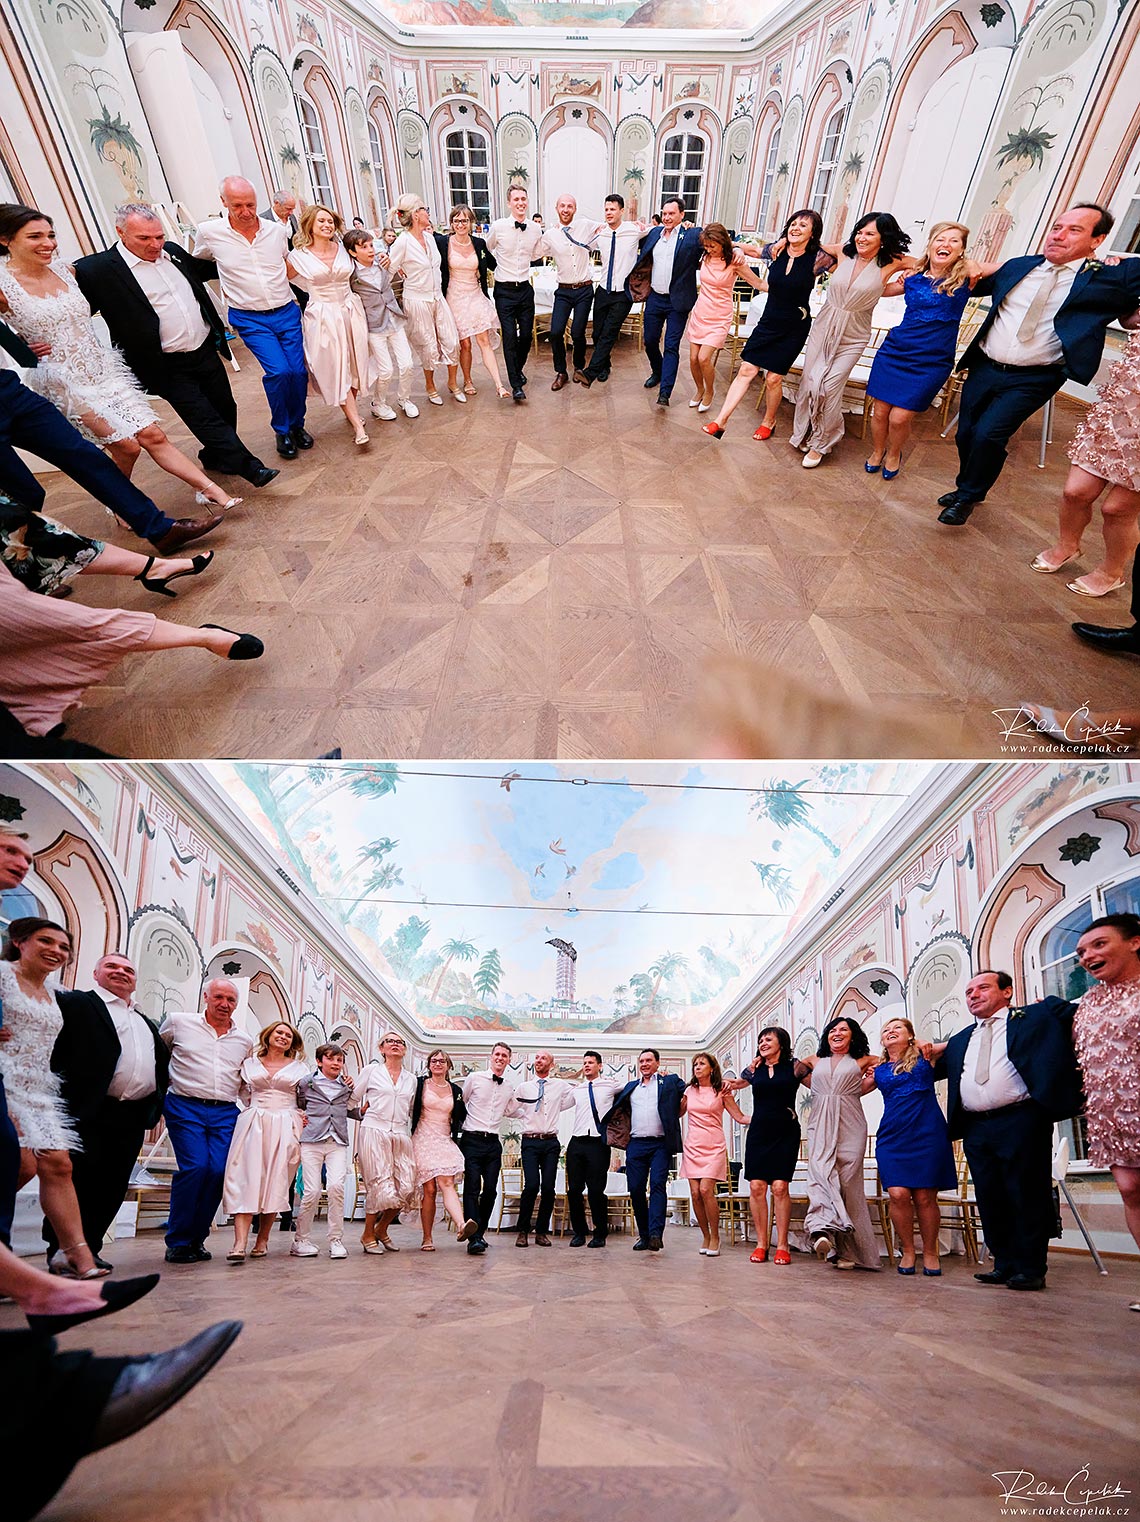 guests dancing in the circle at wedding